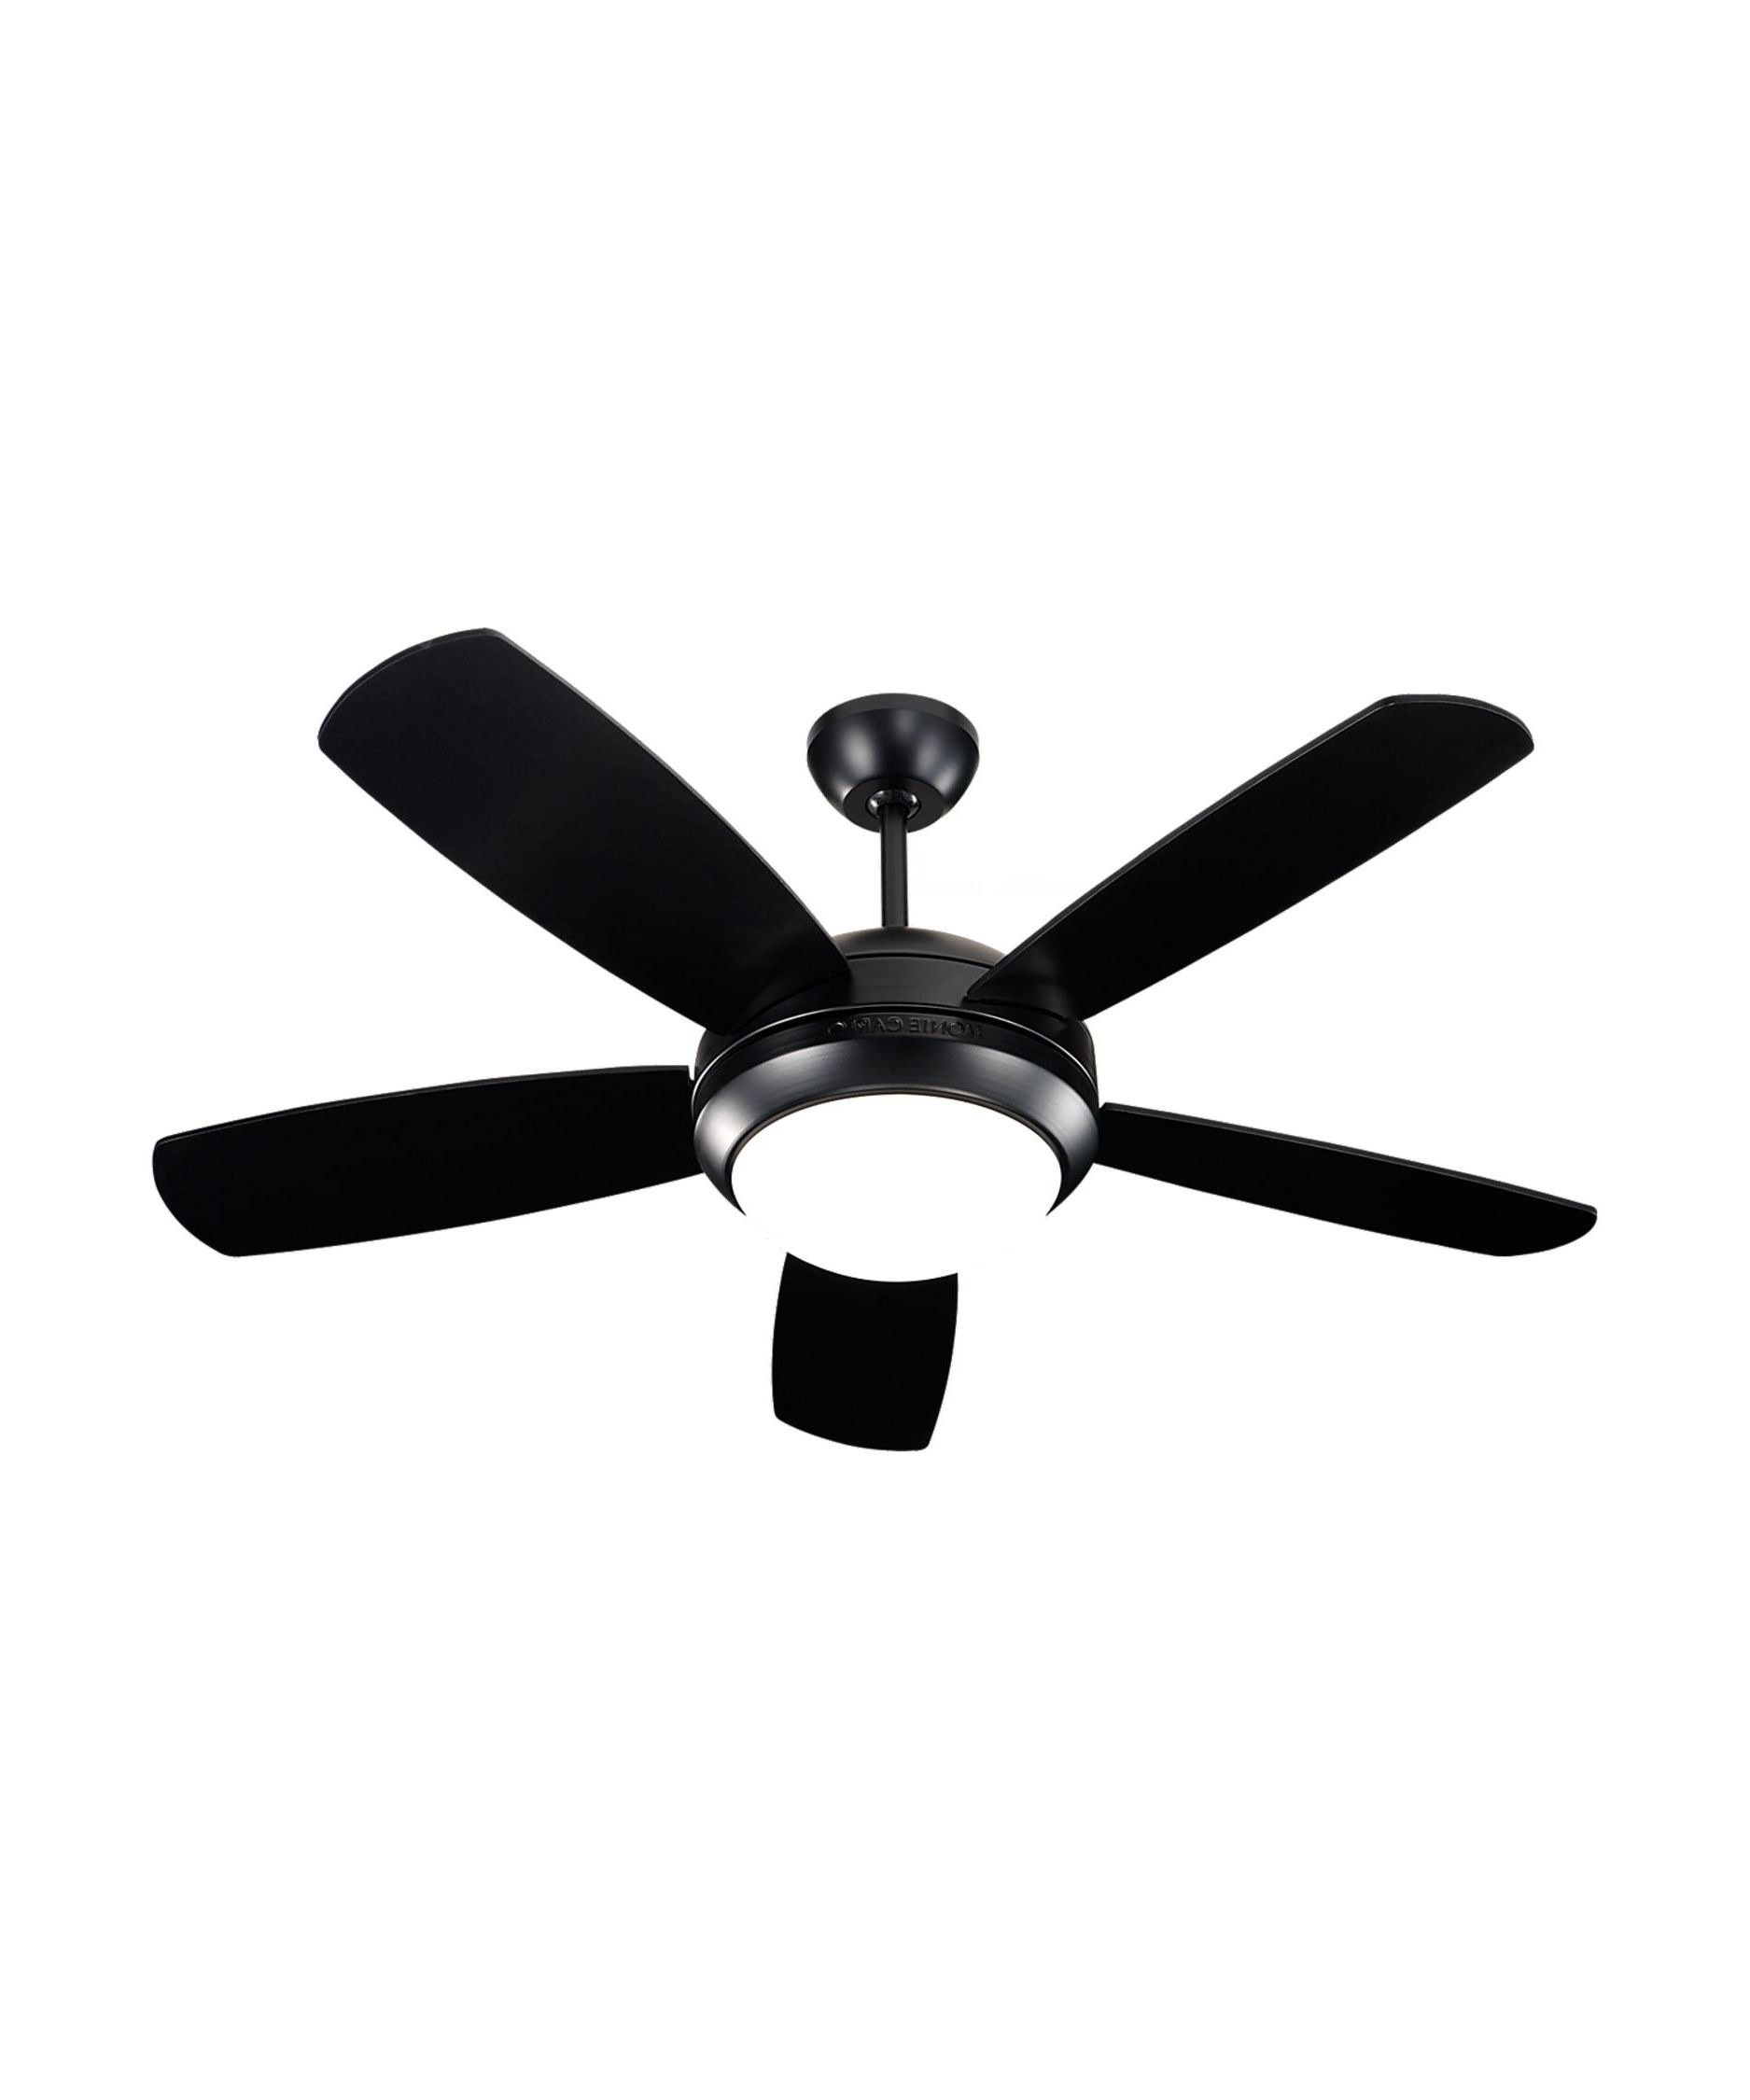 Big Ho Black Outdoor Ceiling Fans With Lights 2018 Lowes Ceiling For Current Black Outdoor Ceiling Fans (View 19 of 20)